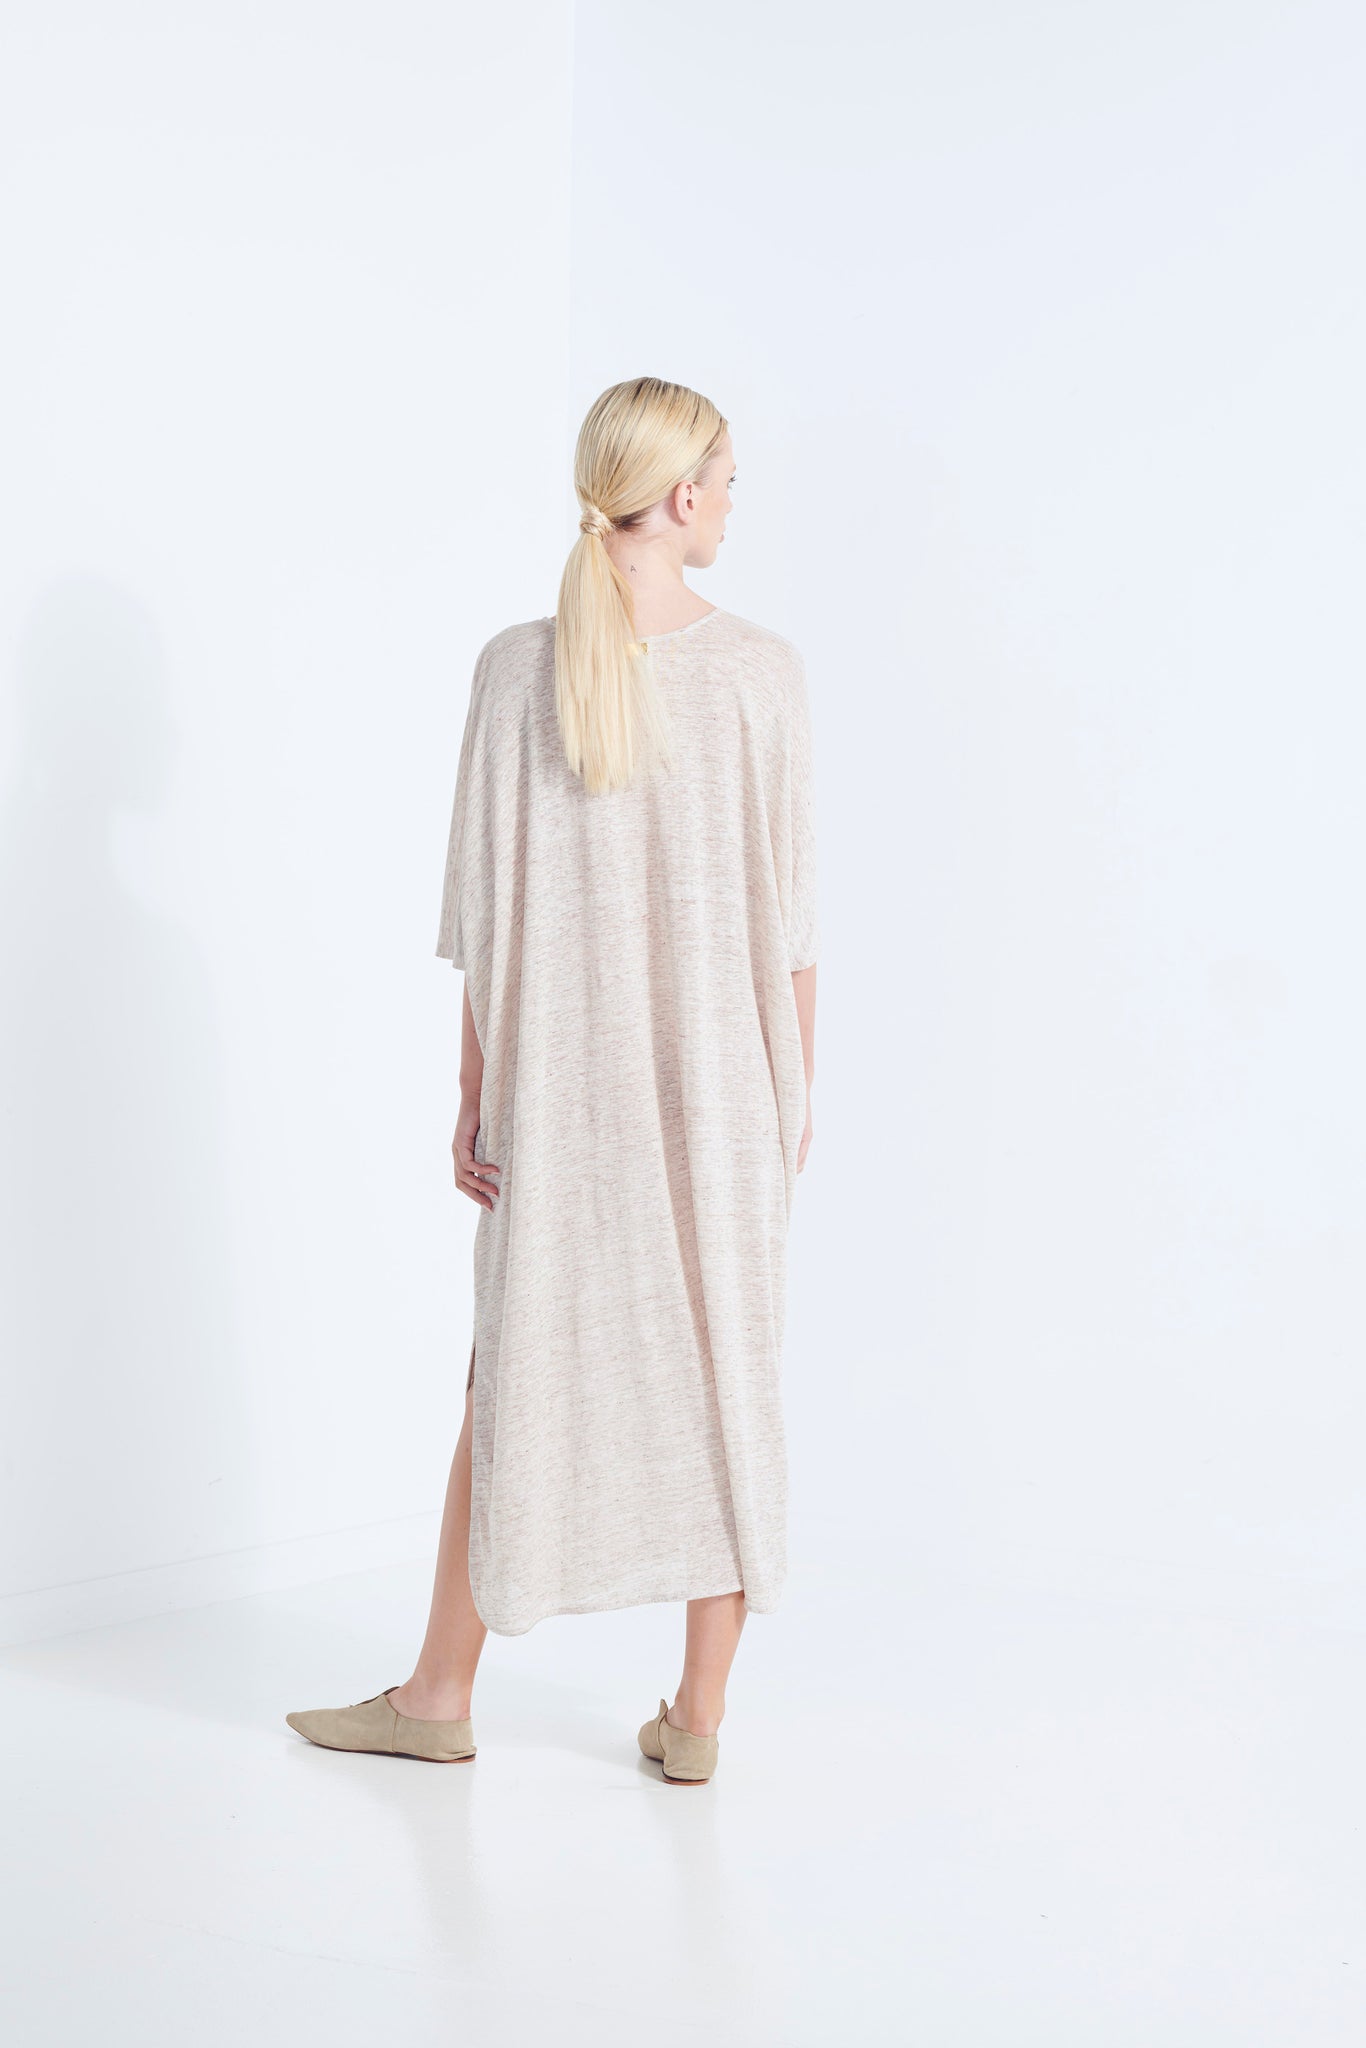 ZEUS DRESS PURE LINEN NATURAL YARN IN WICKER WITH SIDE HEM SCOOP AND SELF FABRIC TIE  BACK VIEW